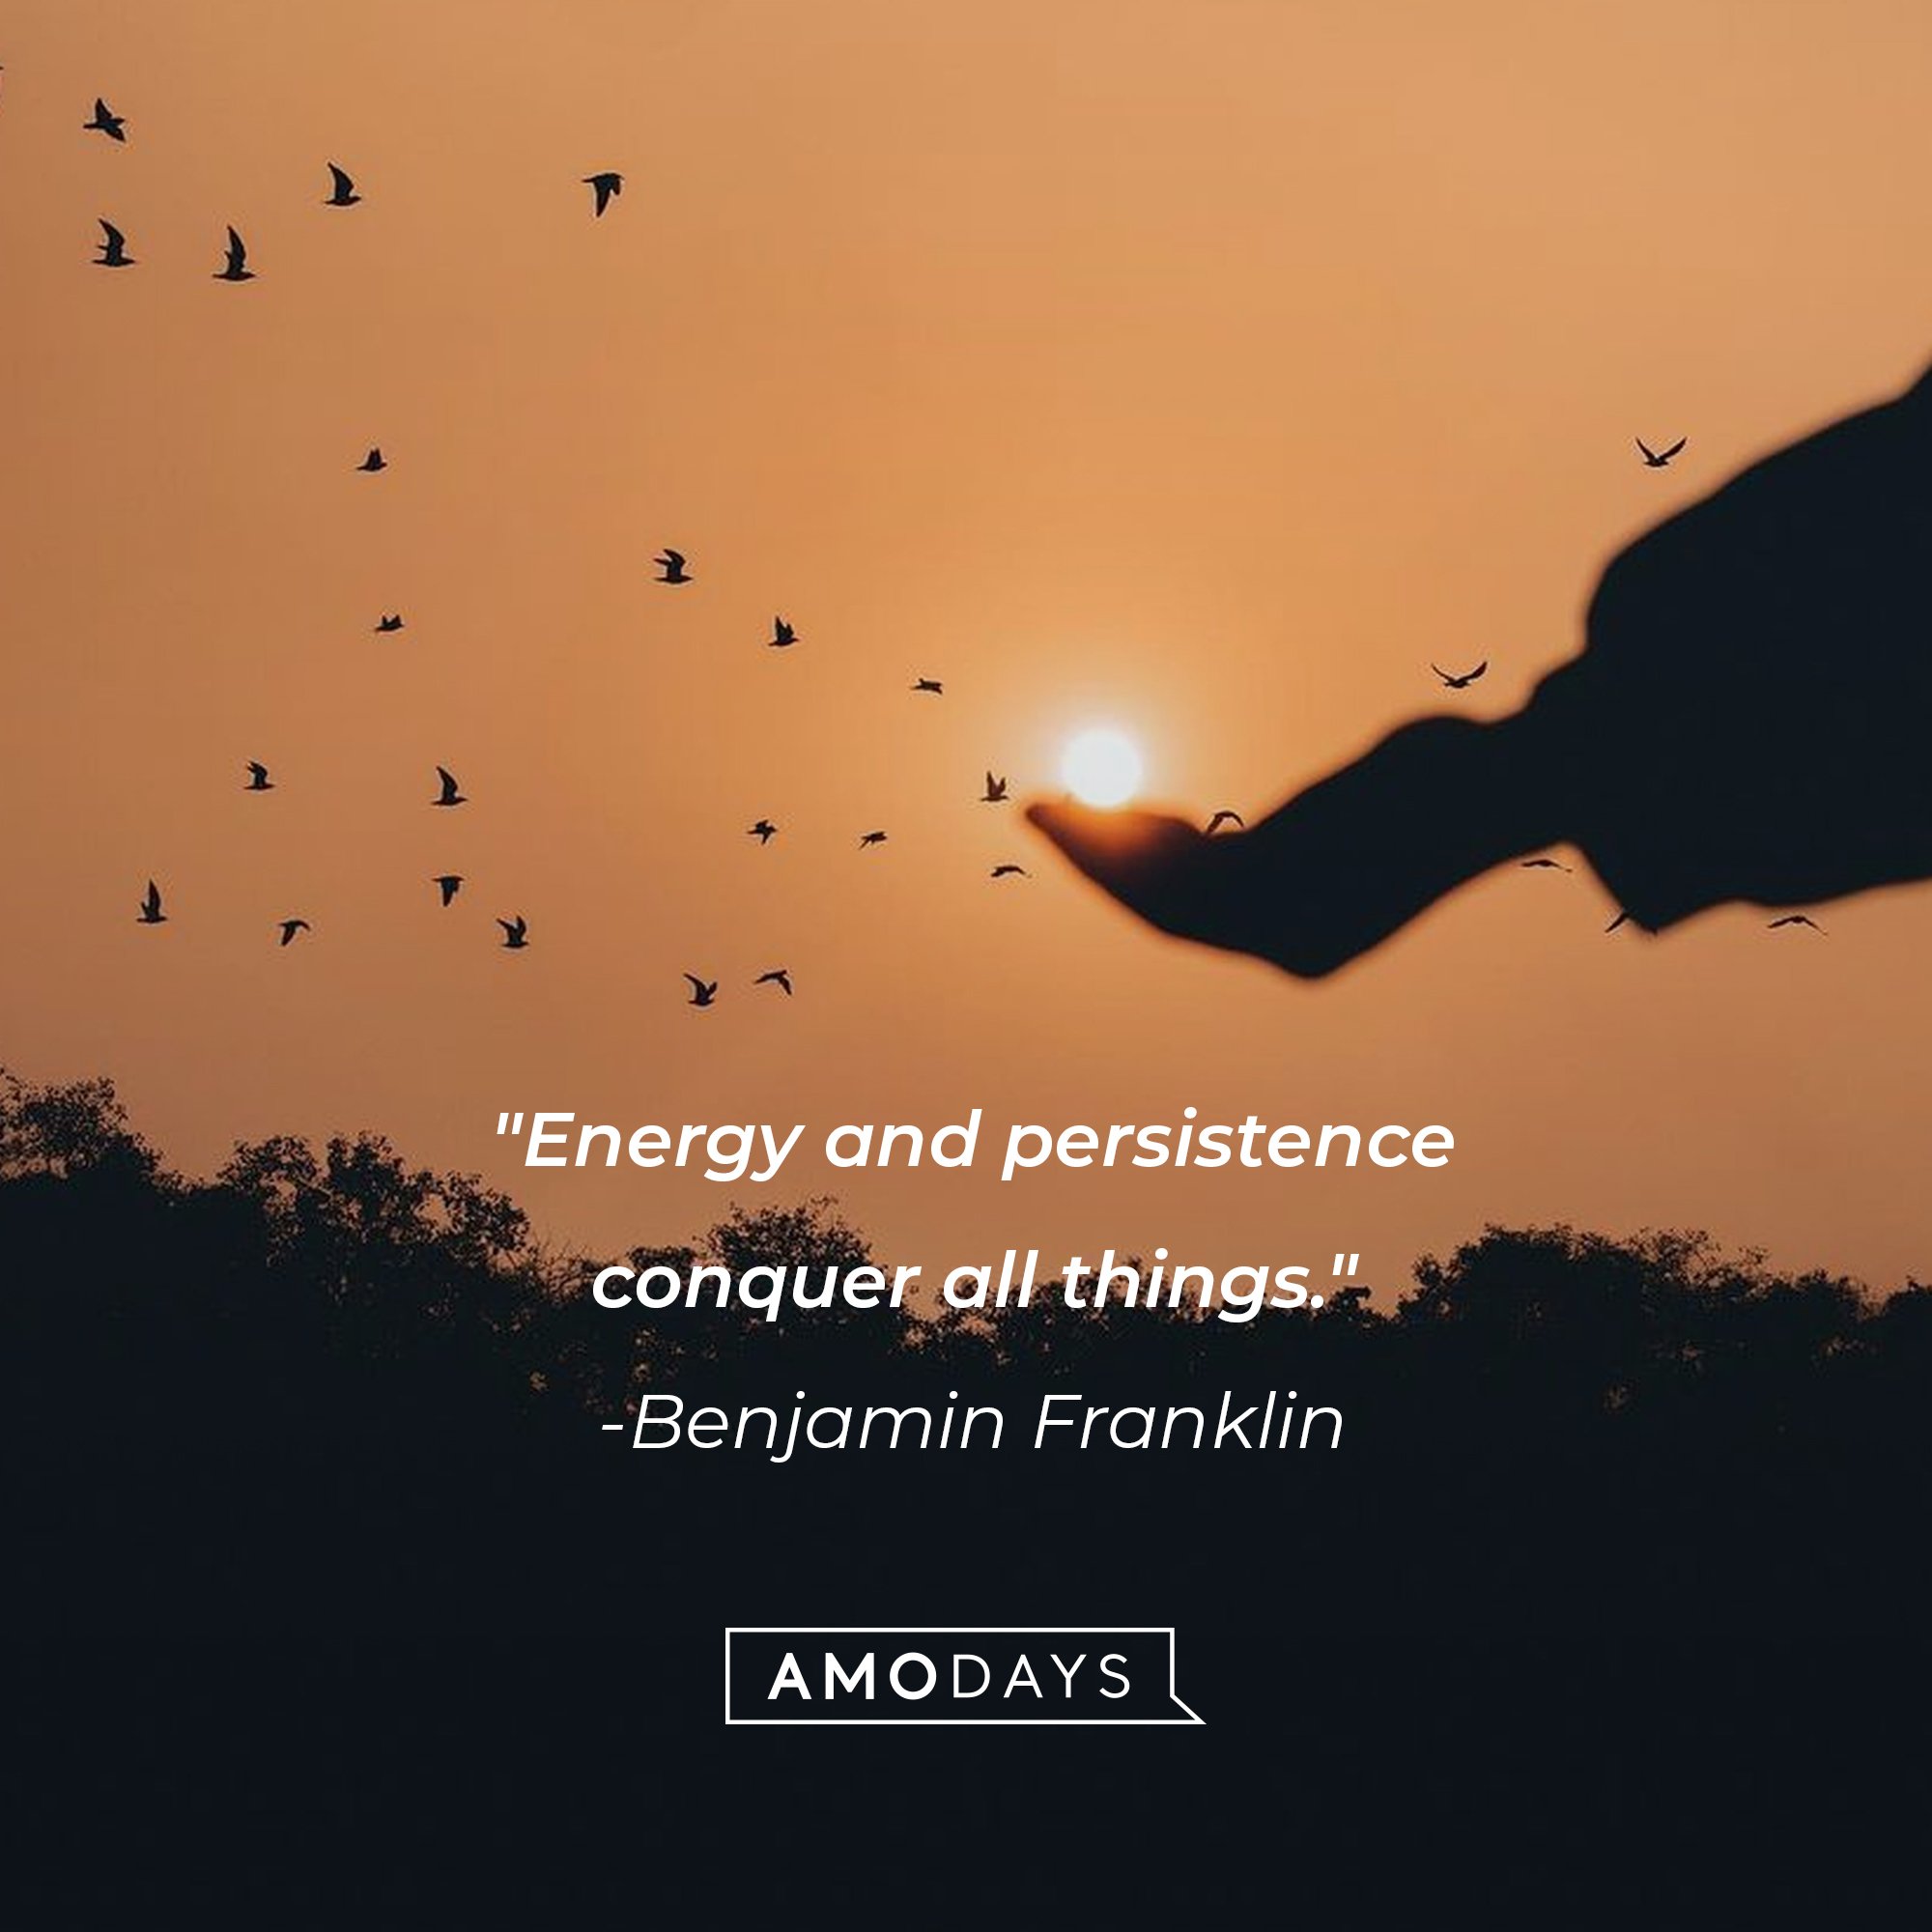 Benjamin Franklin’s quote: "Energy and persistence conquer all things." | Image: AmoDays   